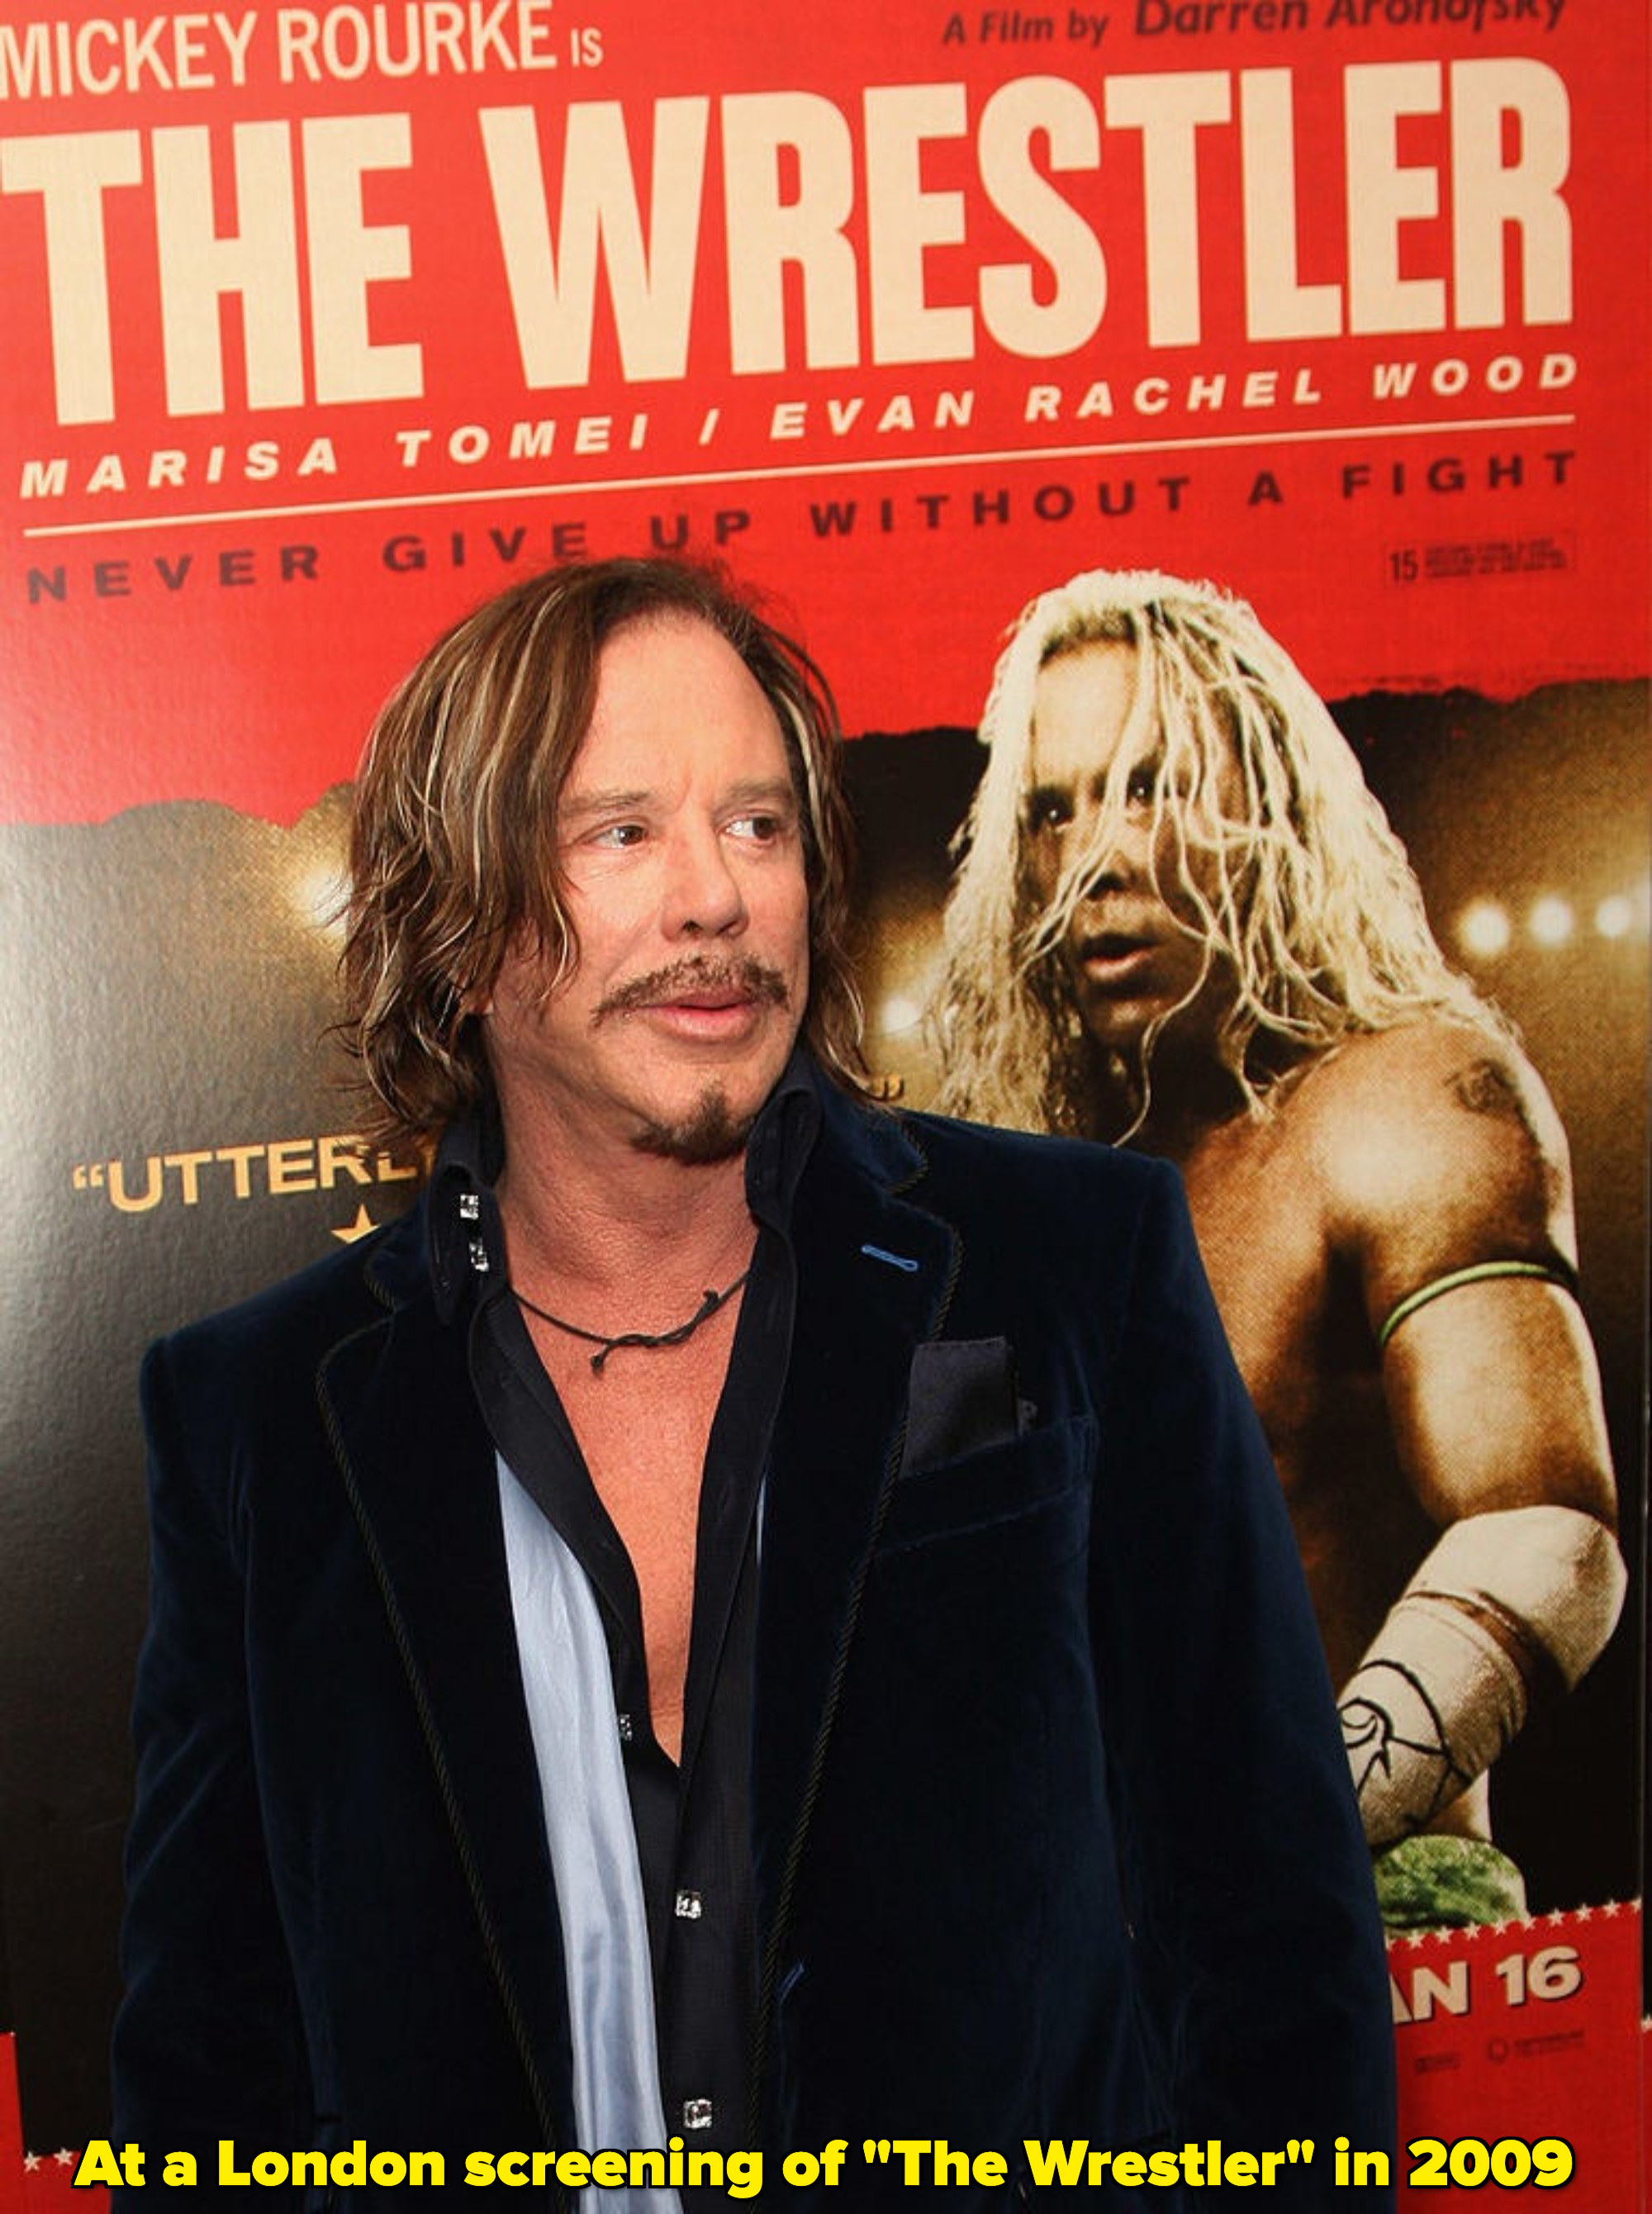 Mickey Rourke standing by a poster for &quot;The Wrestler&quot;